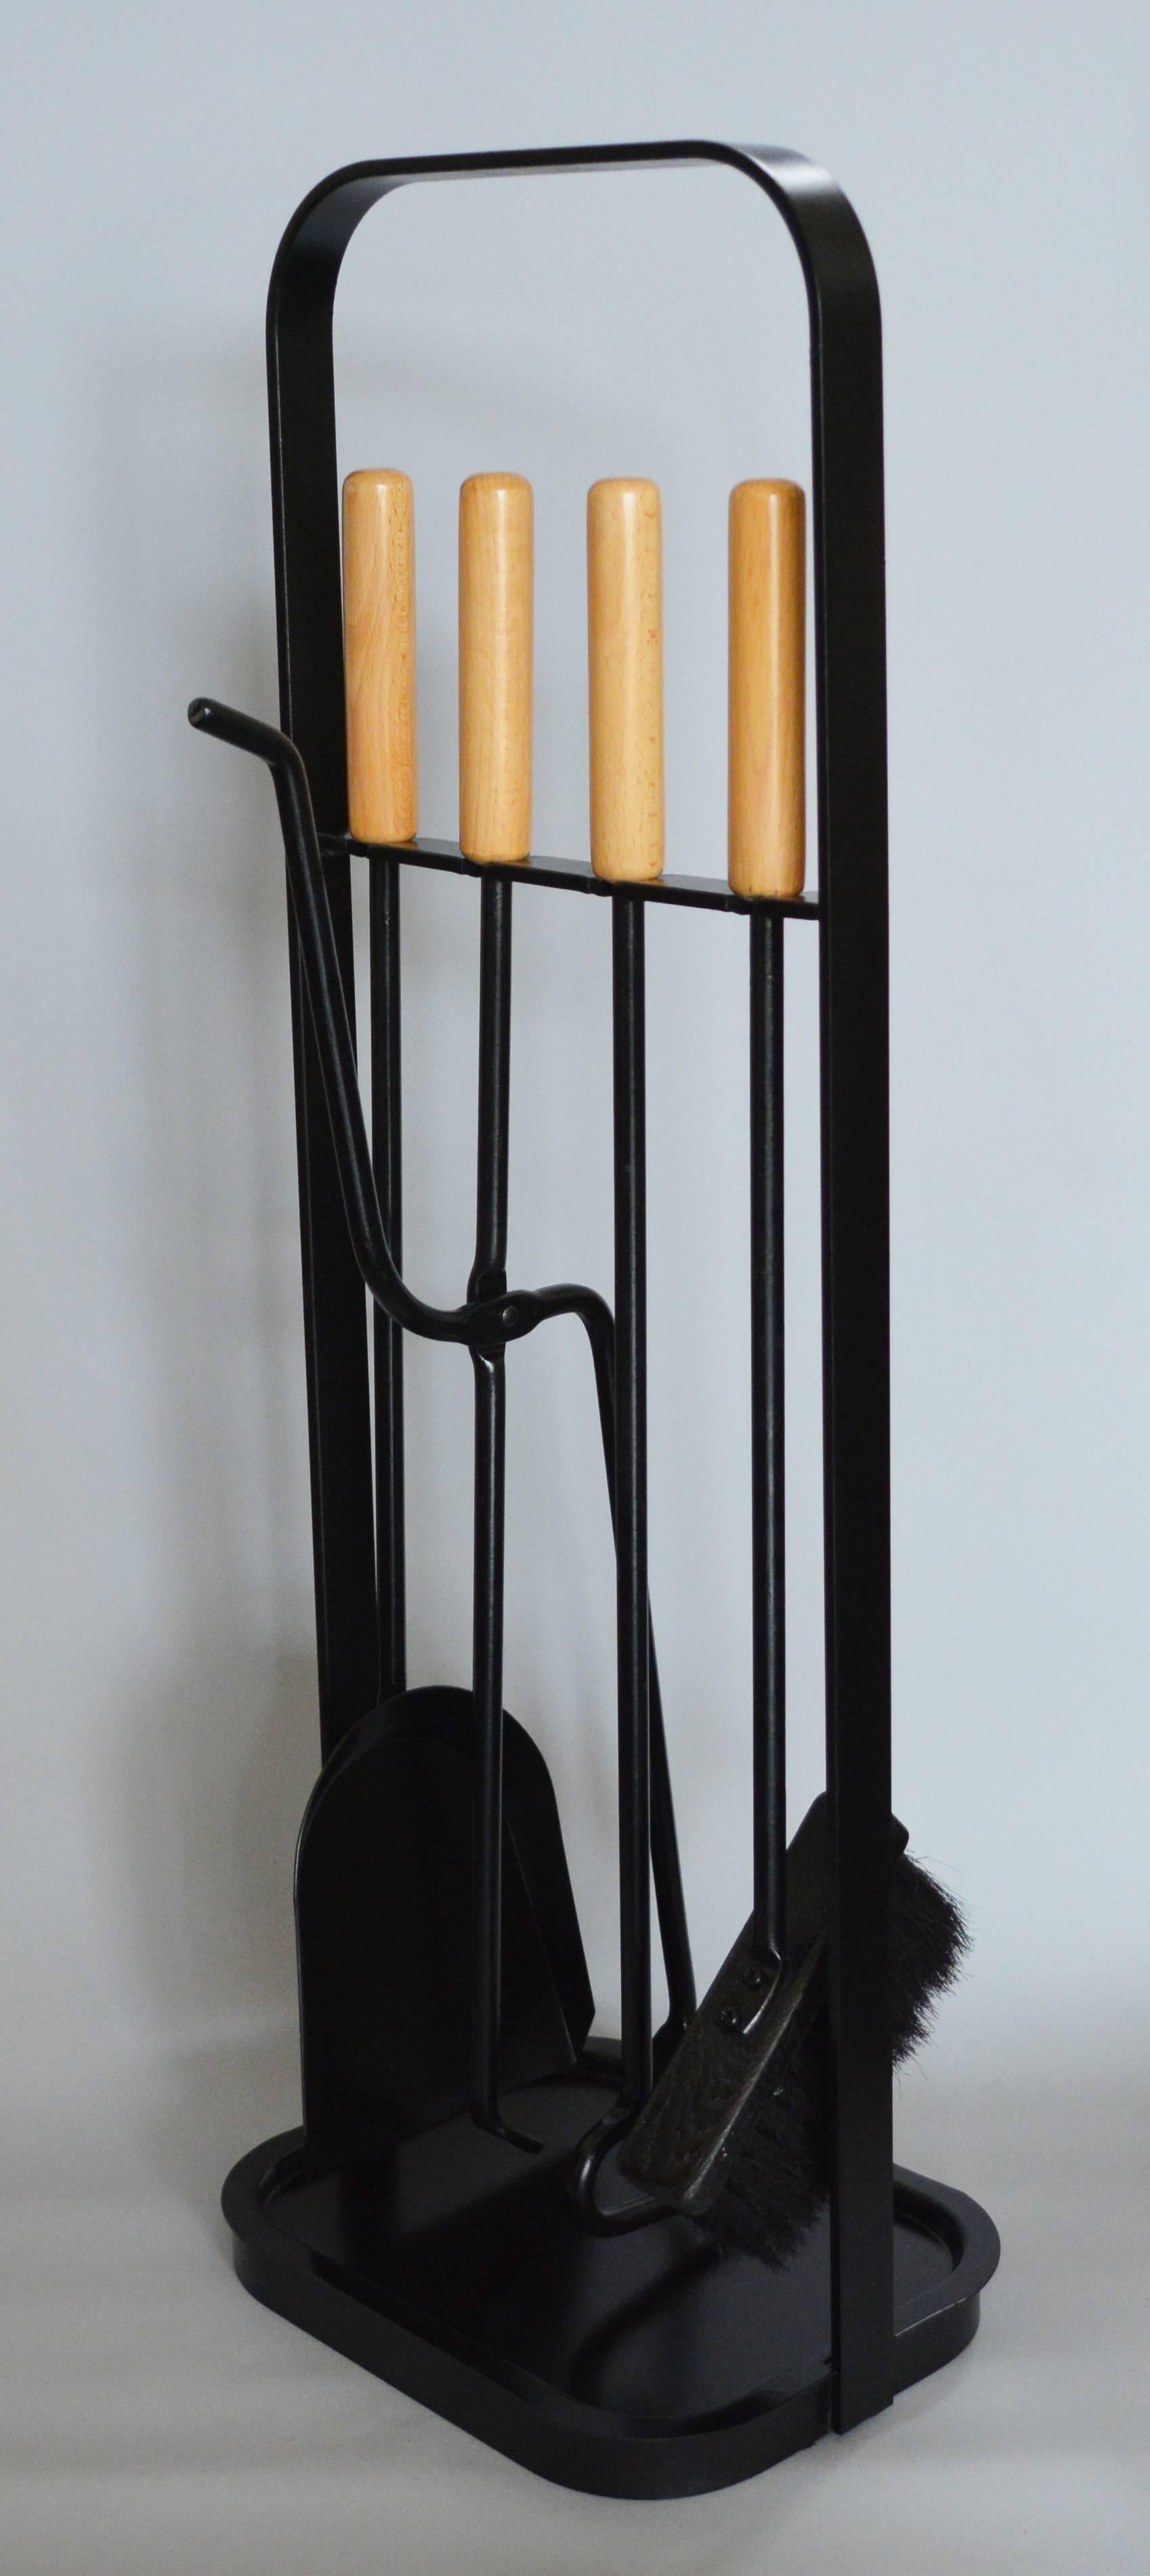 Set of modernist iron fireplace tools. These have beech handles. This simple clean lined set has a sculptural quality to it. The set includes a poker, broom, dustpan and log grabber. The tray at the bottom is removable.